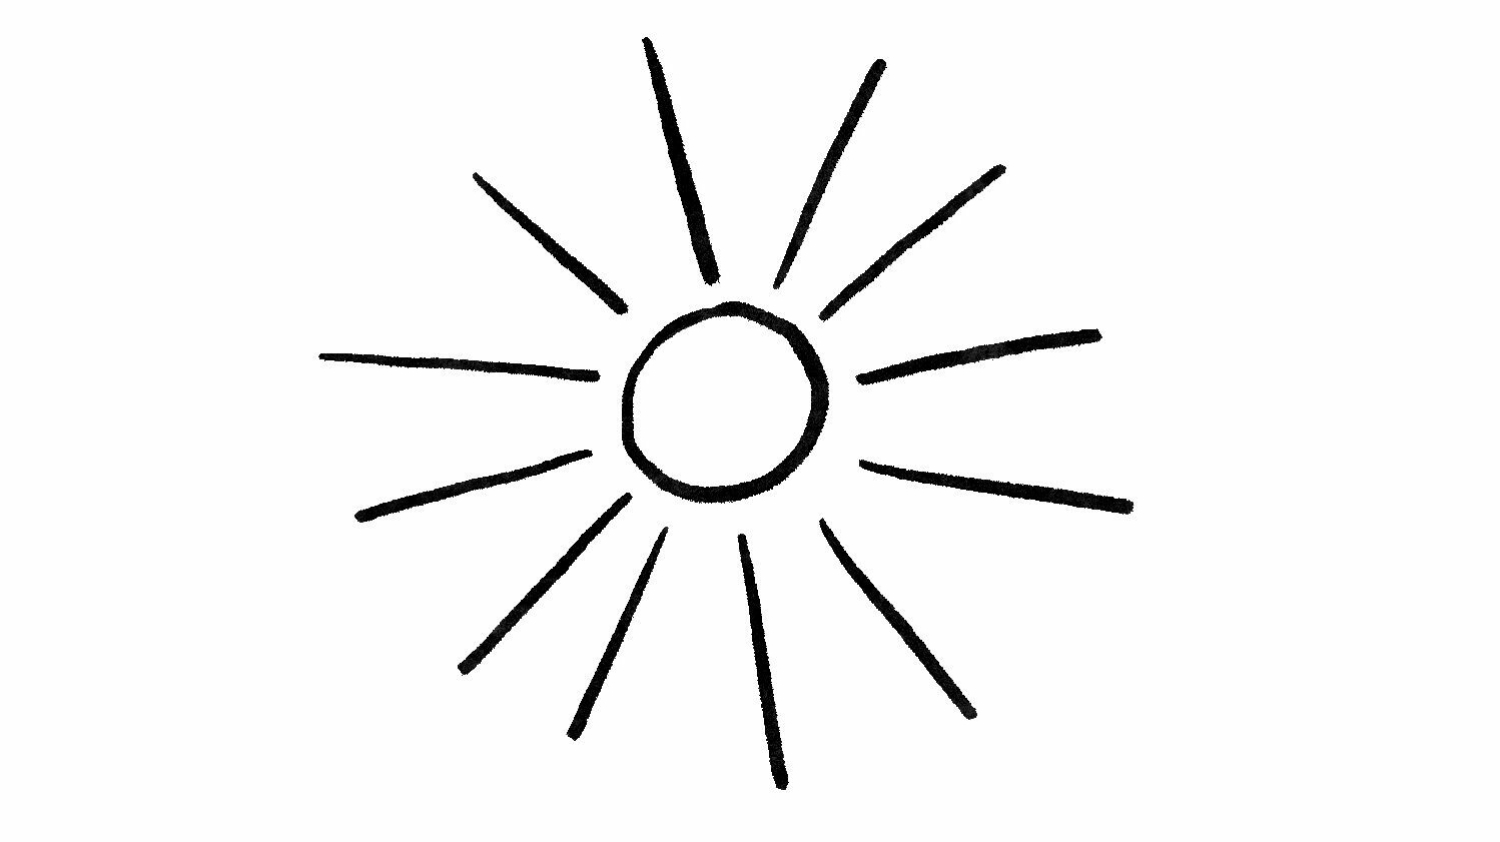 A black and white drawing of a sun.